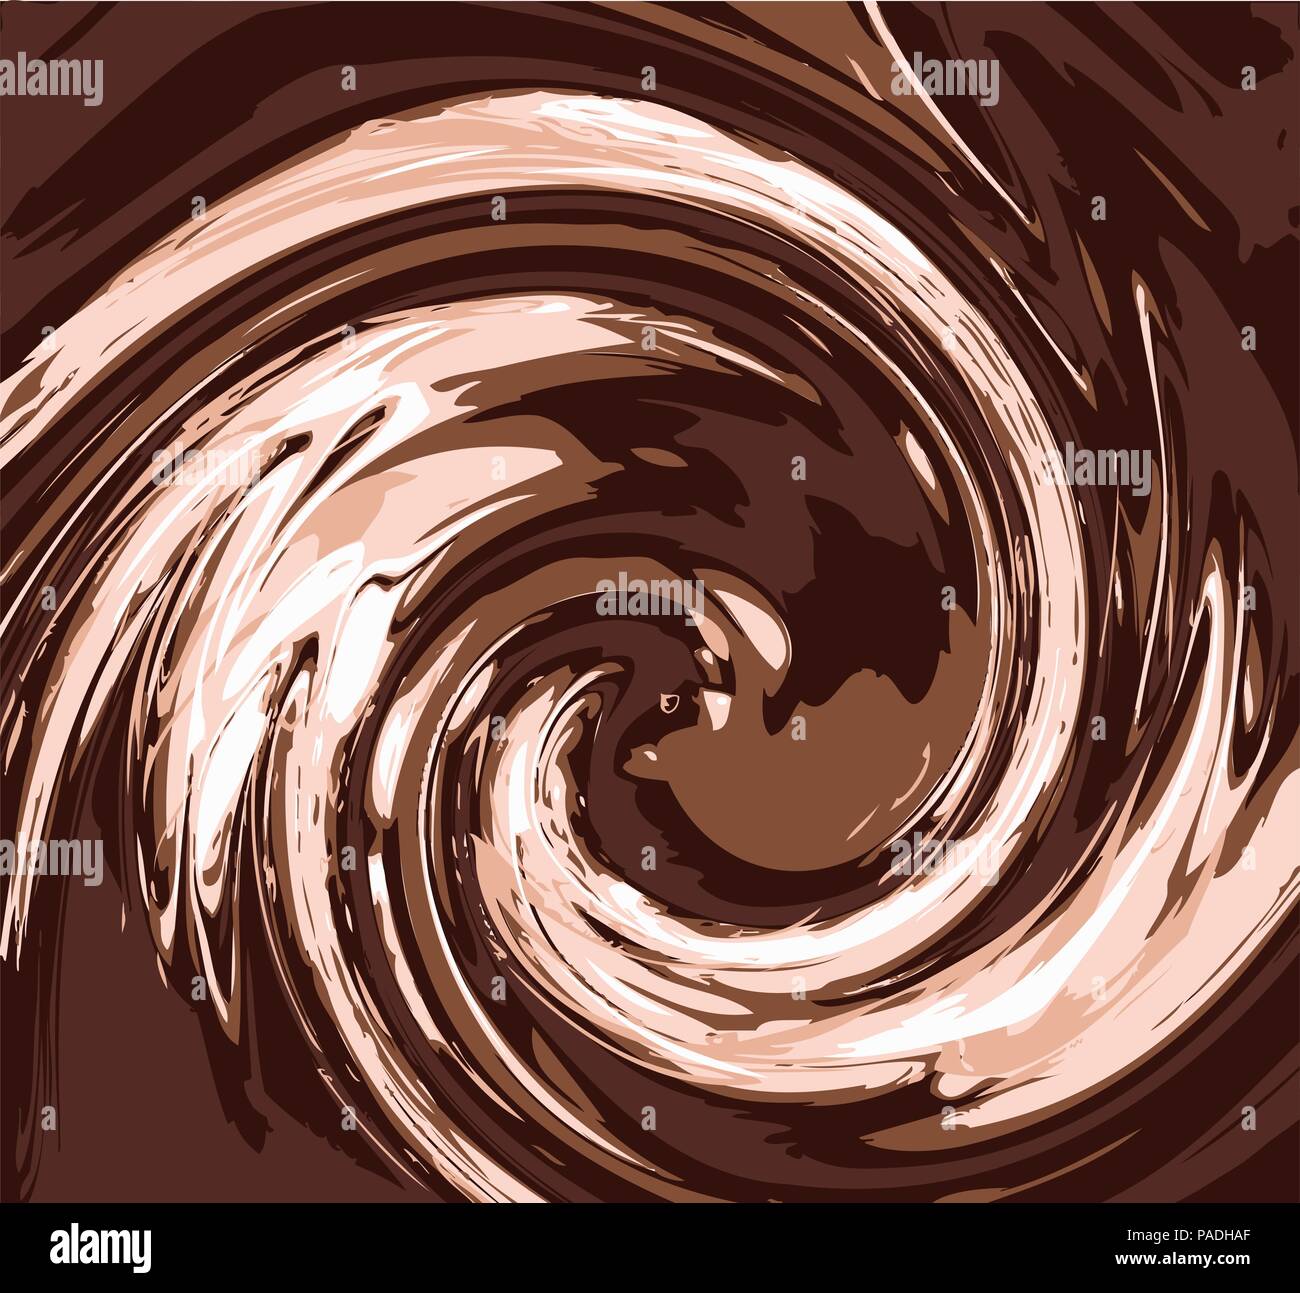 vector background illustration of flowing chocolate swirl, each color is on separate layer Stock Vector